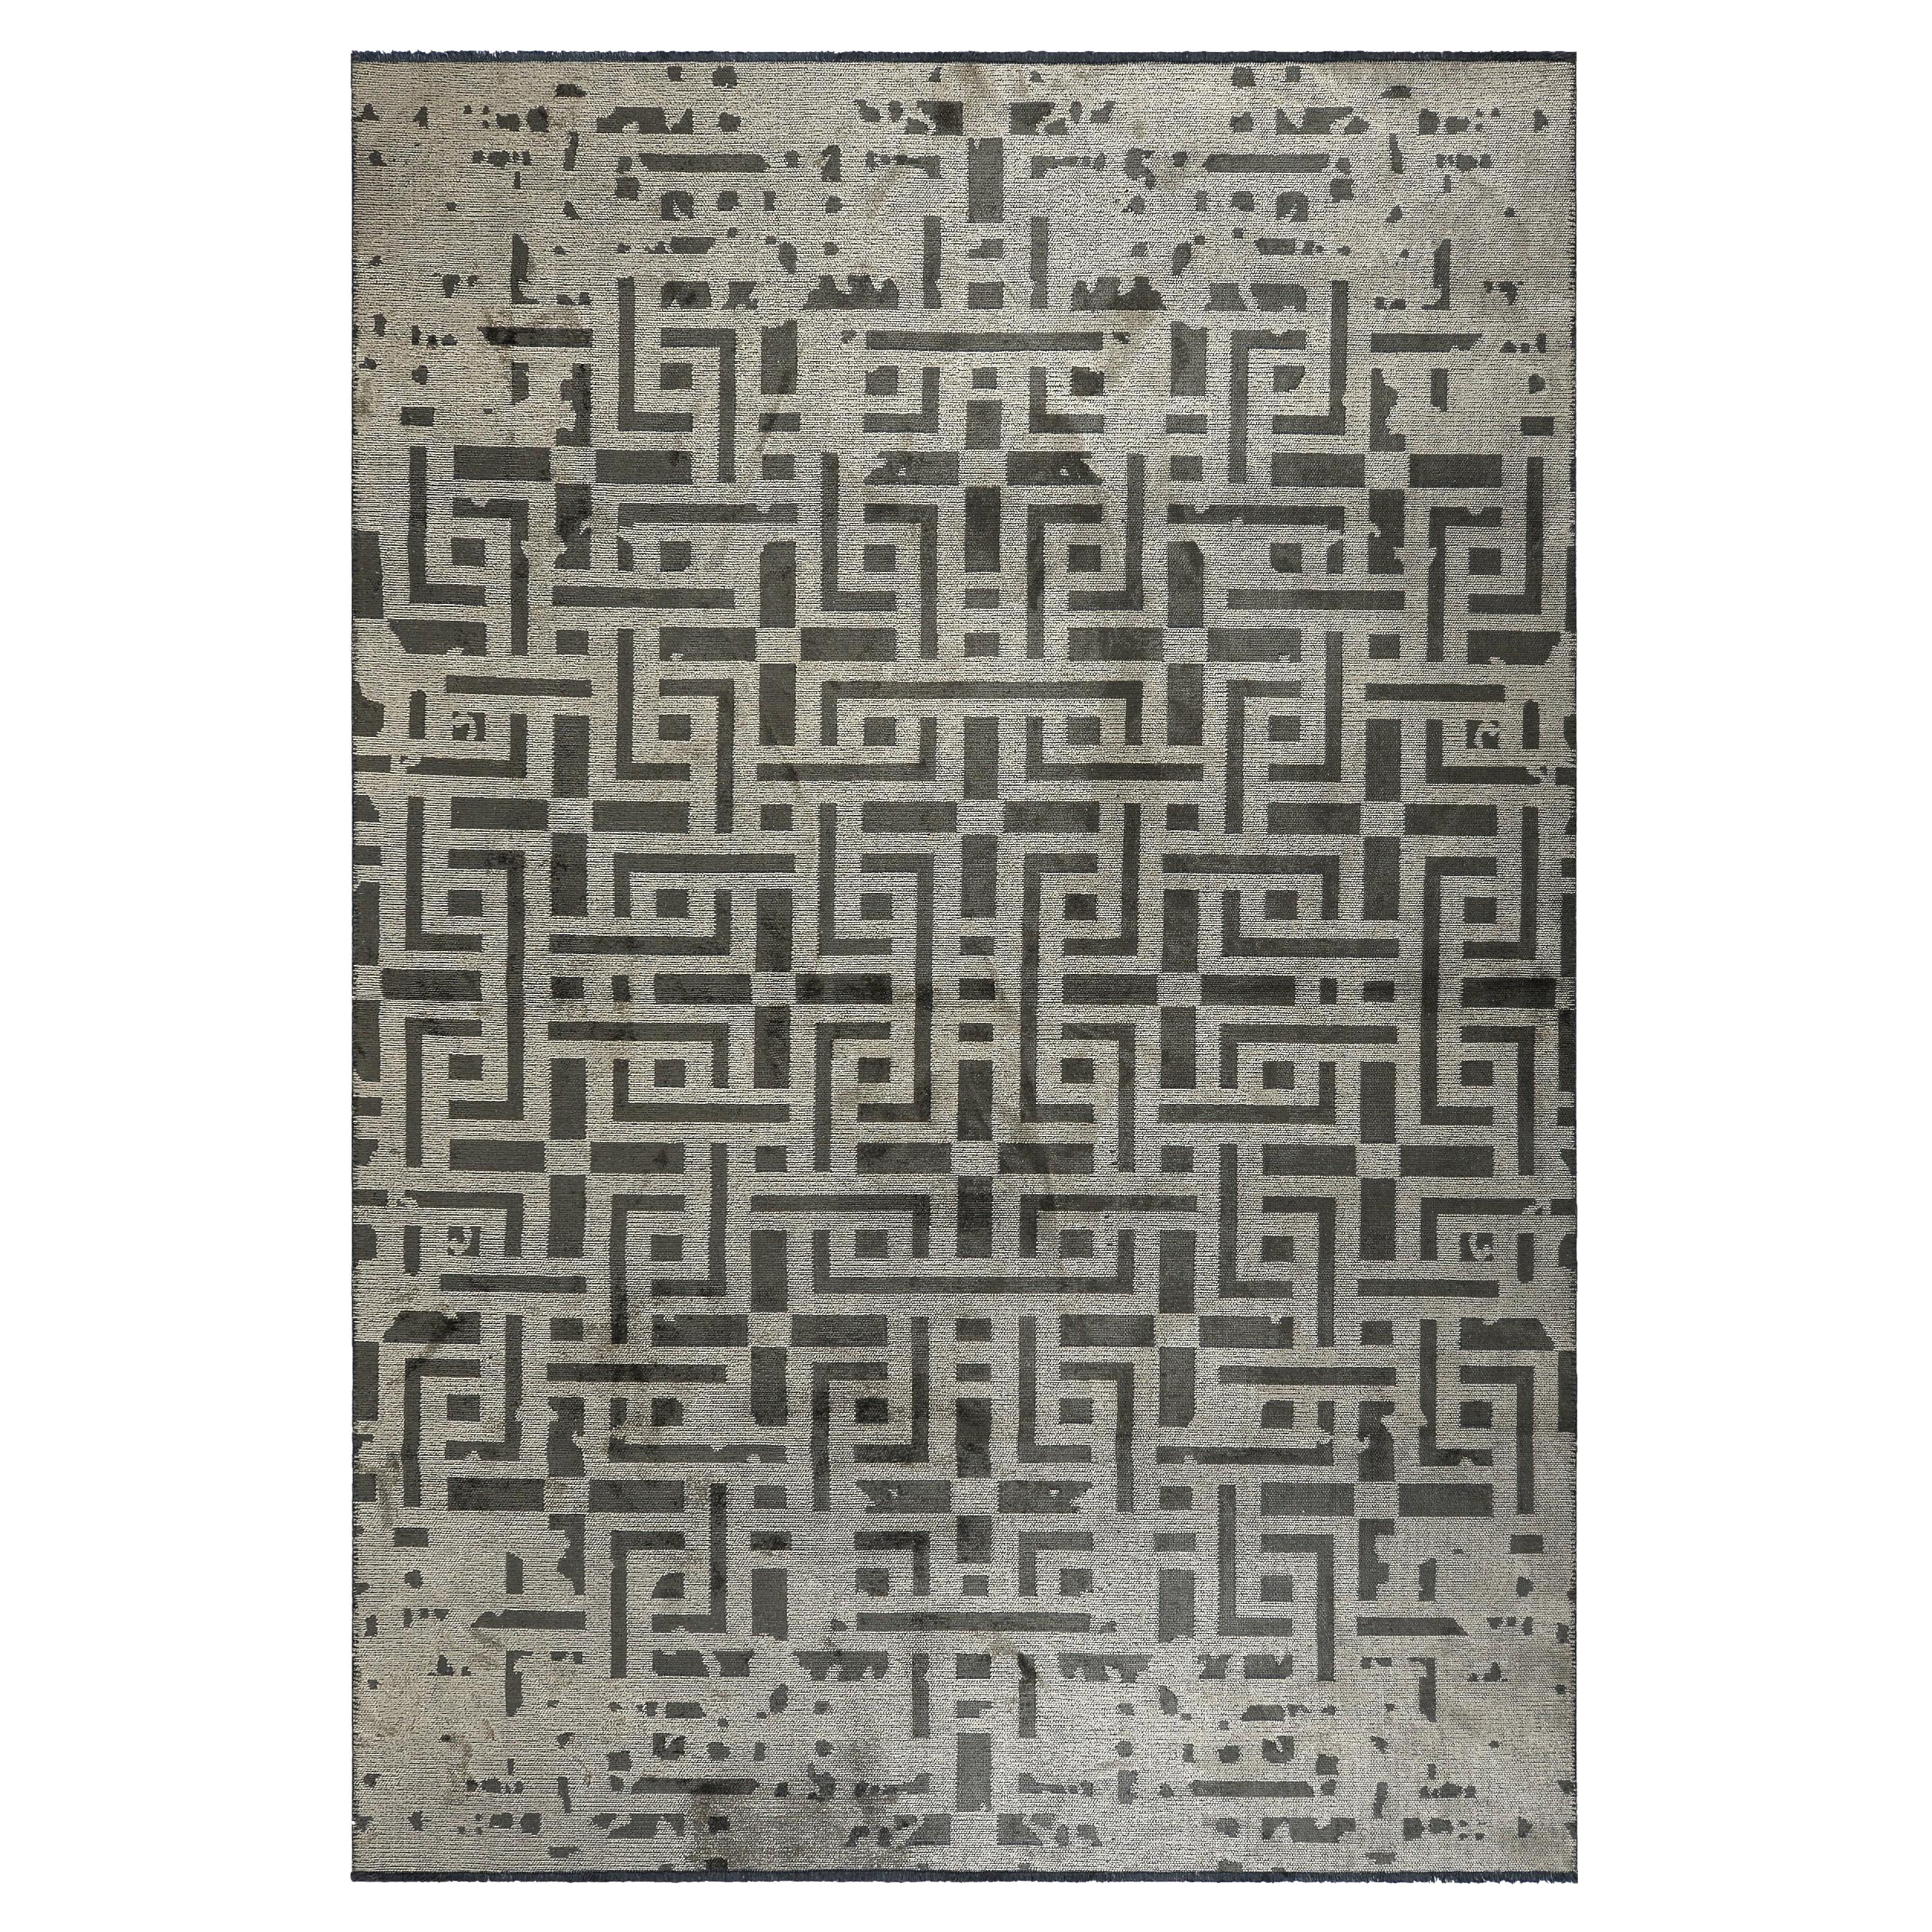 Contemporary Geometric Luxury Hand-Finished Area Rug